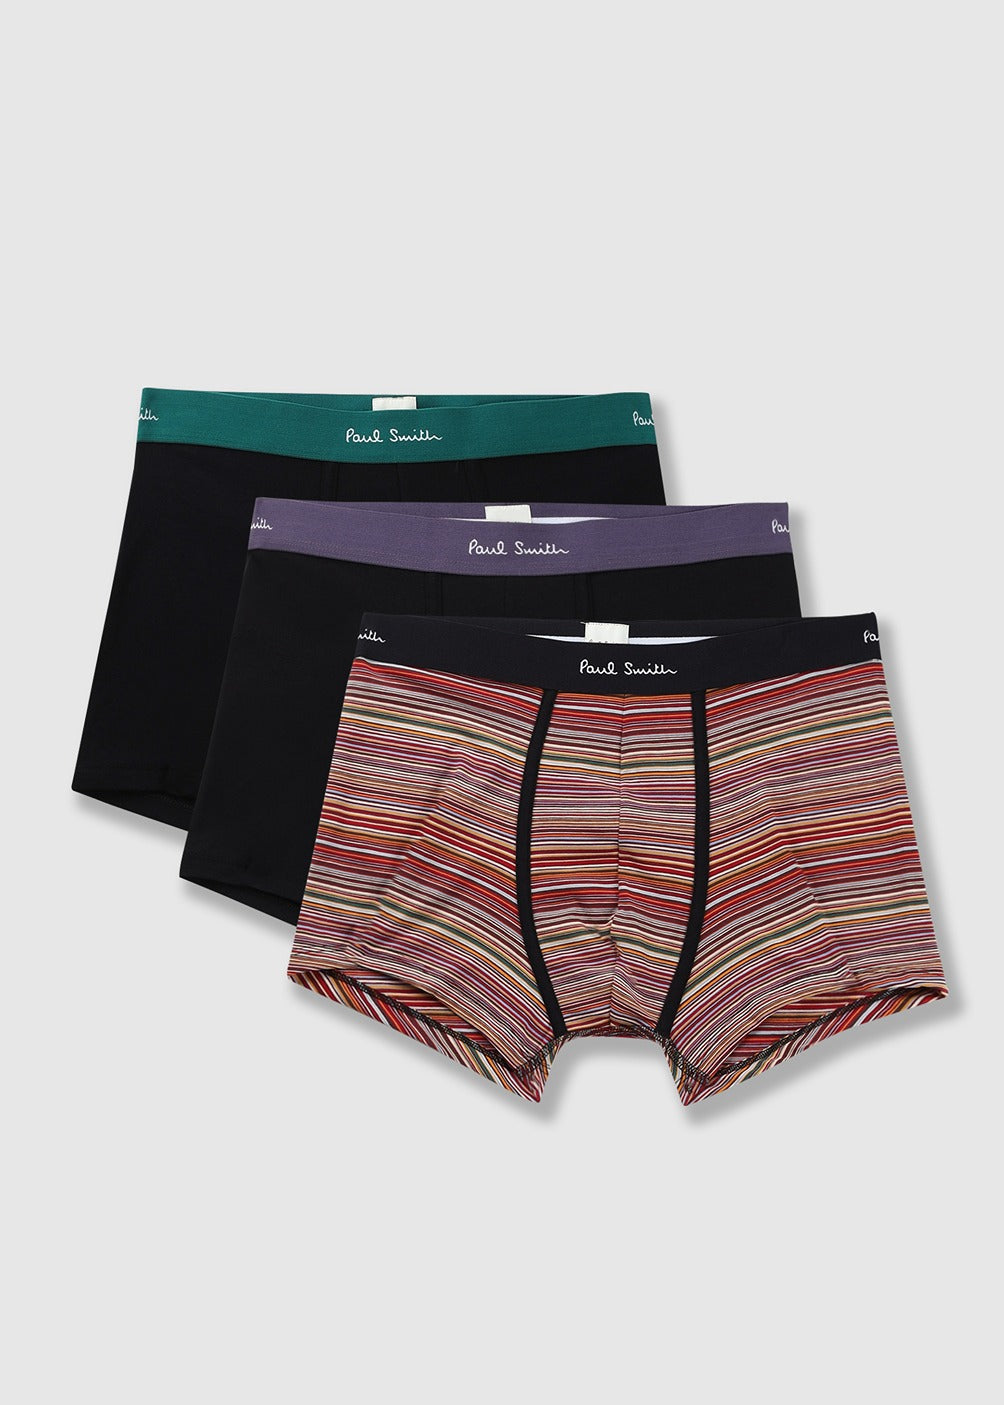 Image of Paul Smith Mens Trunk 3 Pack Detailed In Black